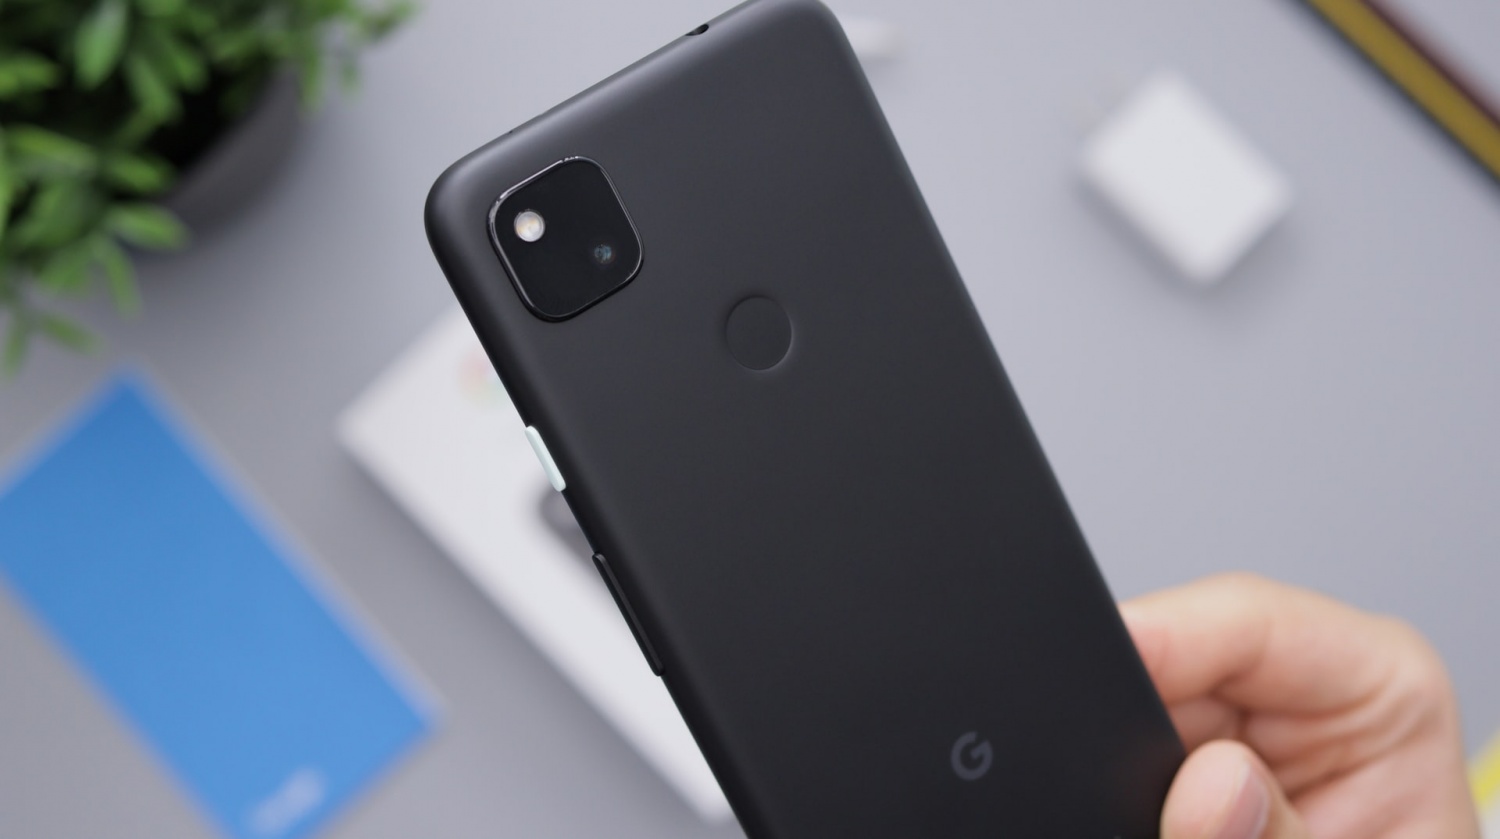 Google Pixel 6 Series Phones to Reportedly Adopt Up to 5 Years of Software Support [LEAK]    